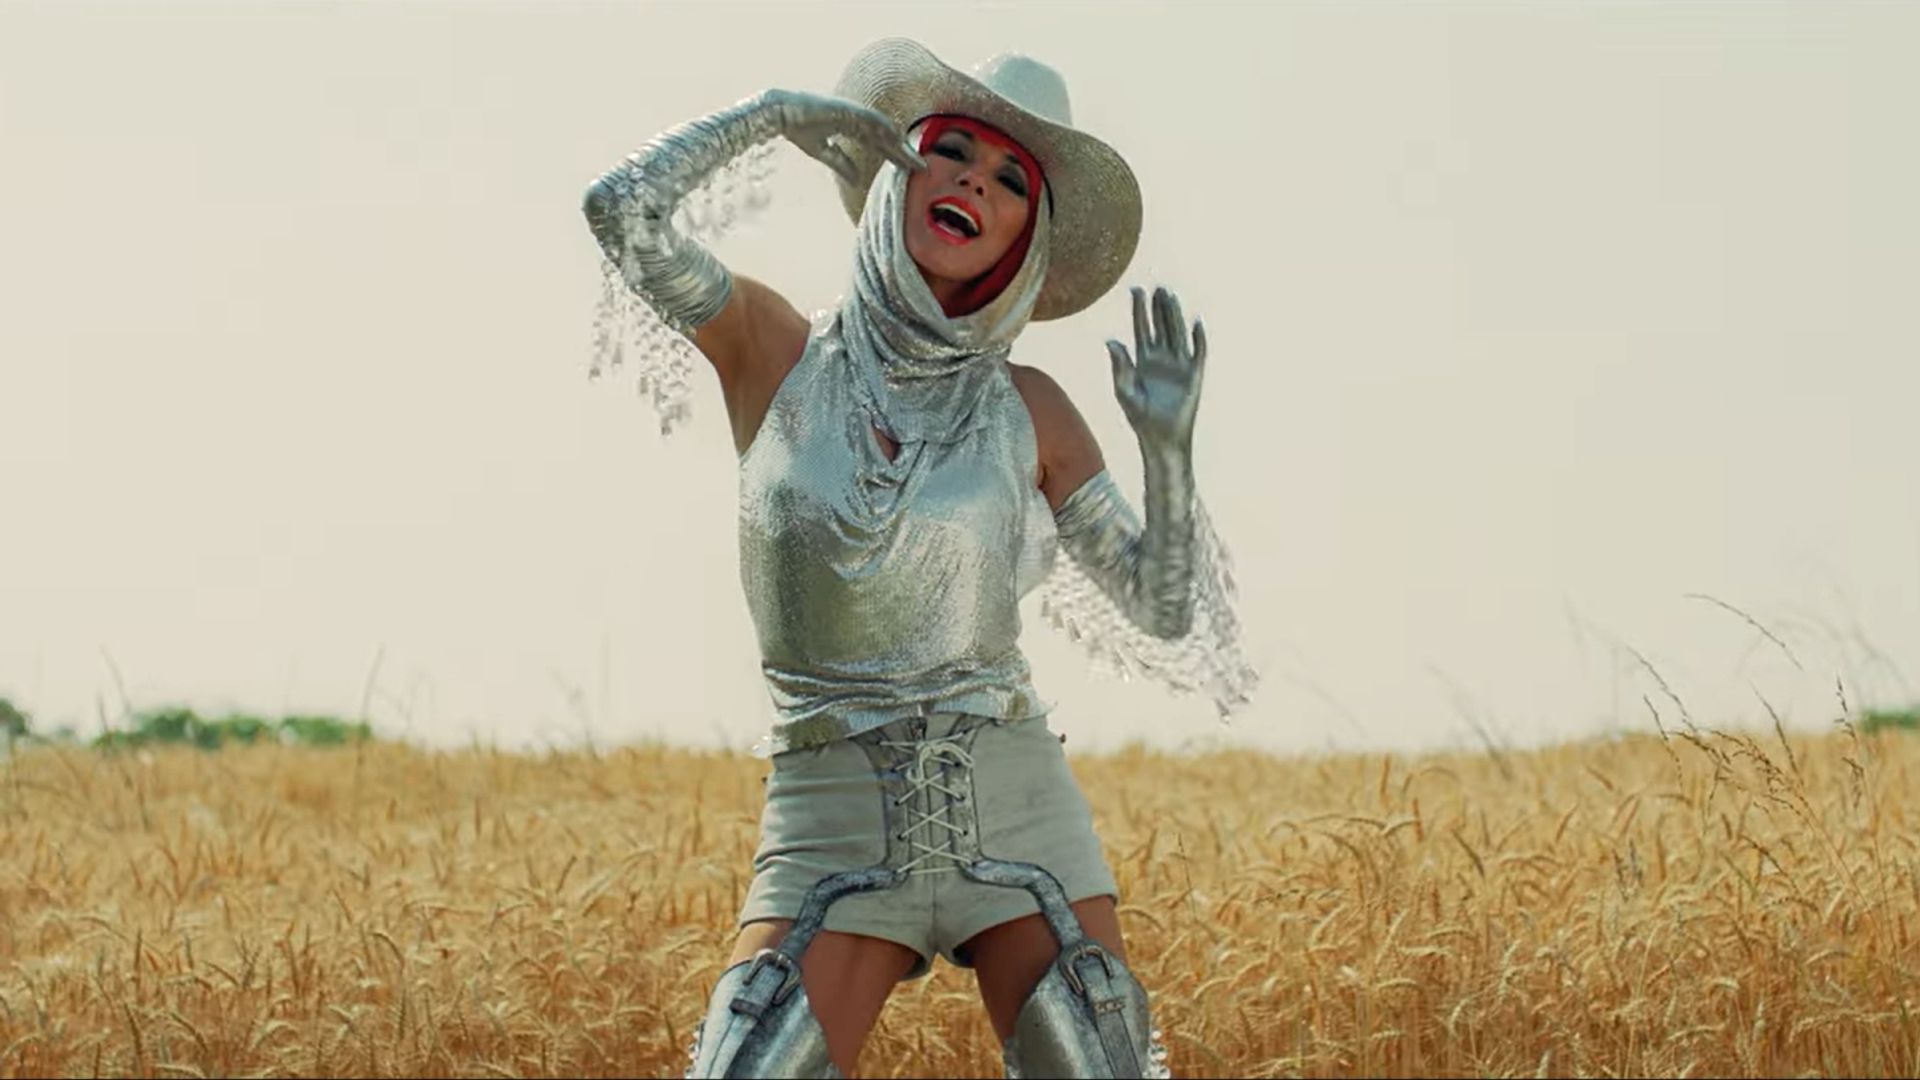 Shania Twain in the new music video for 'Unhealthy'